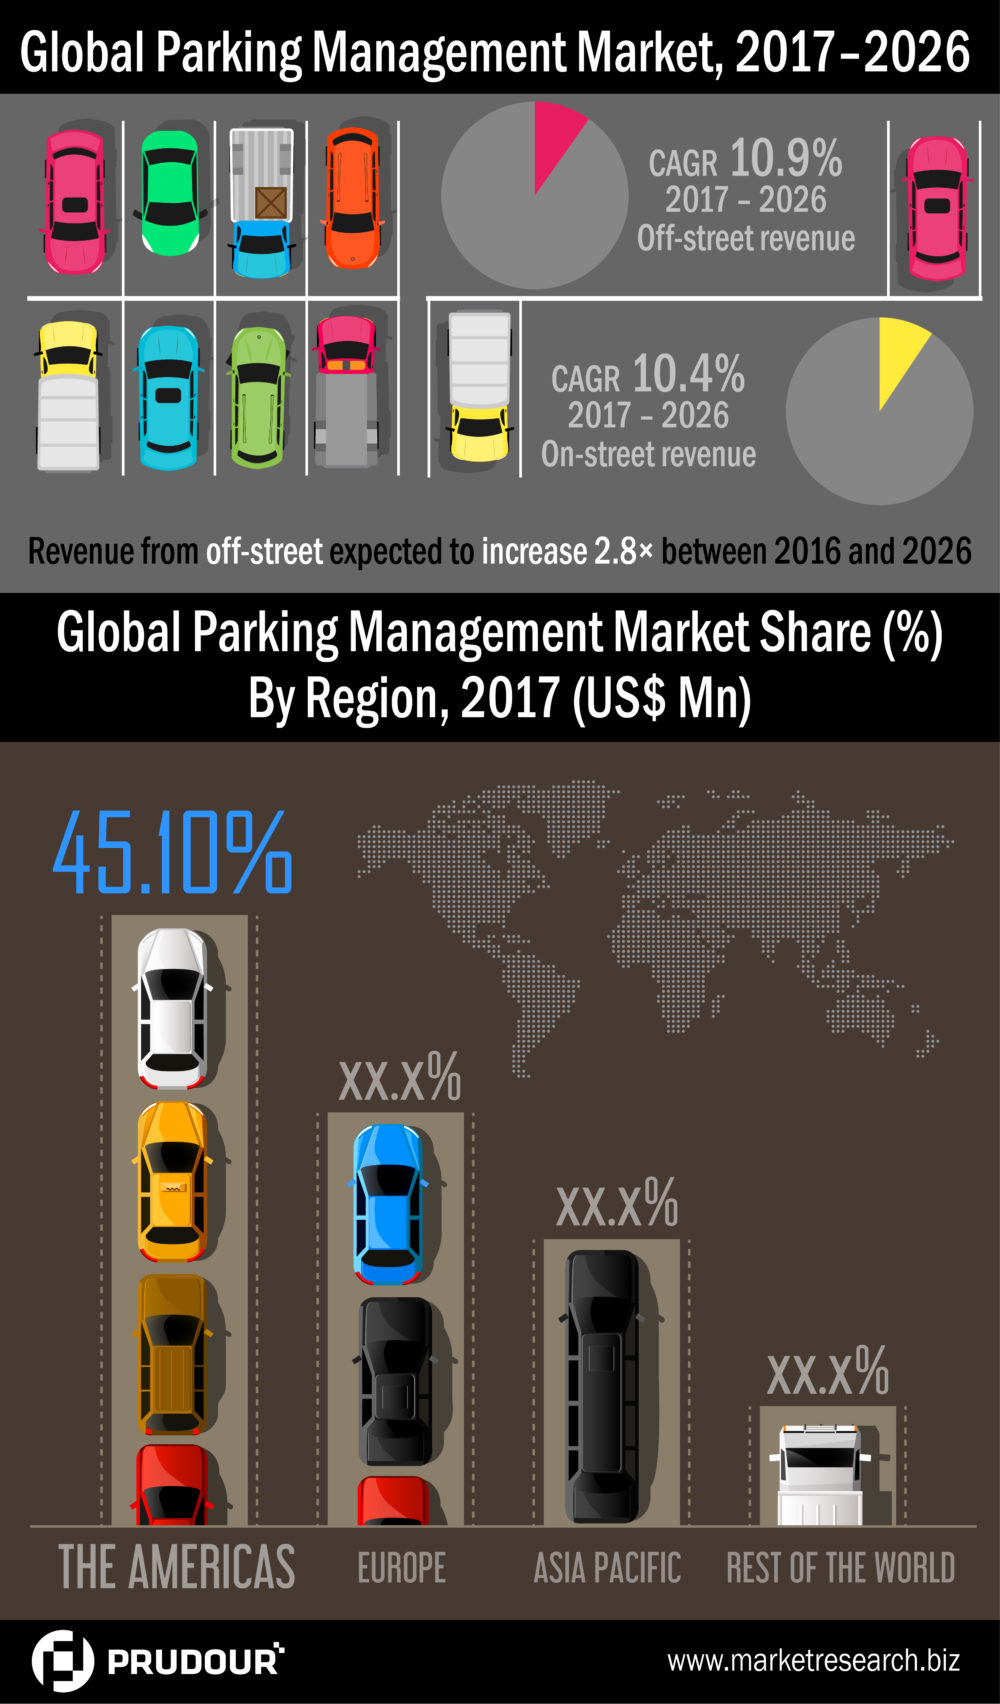 Global Parking Management Market to Expand with 10.75% CAGR During 2018-2026